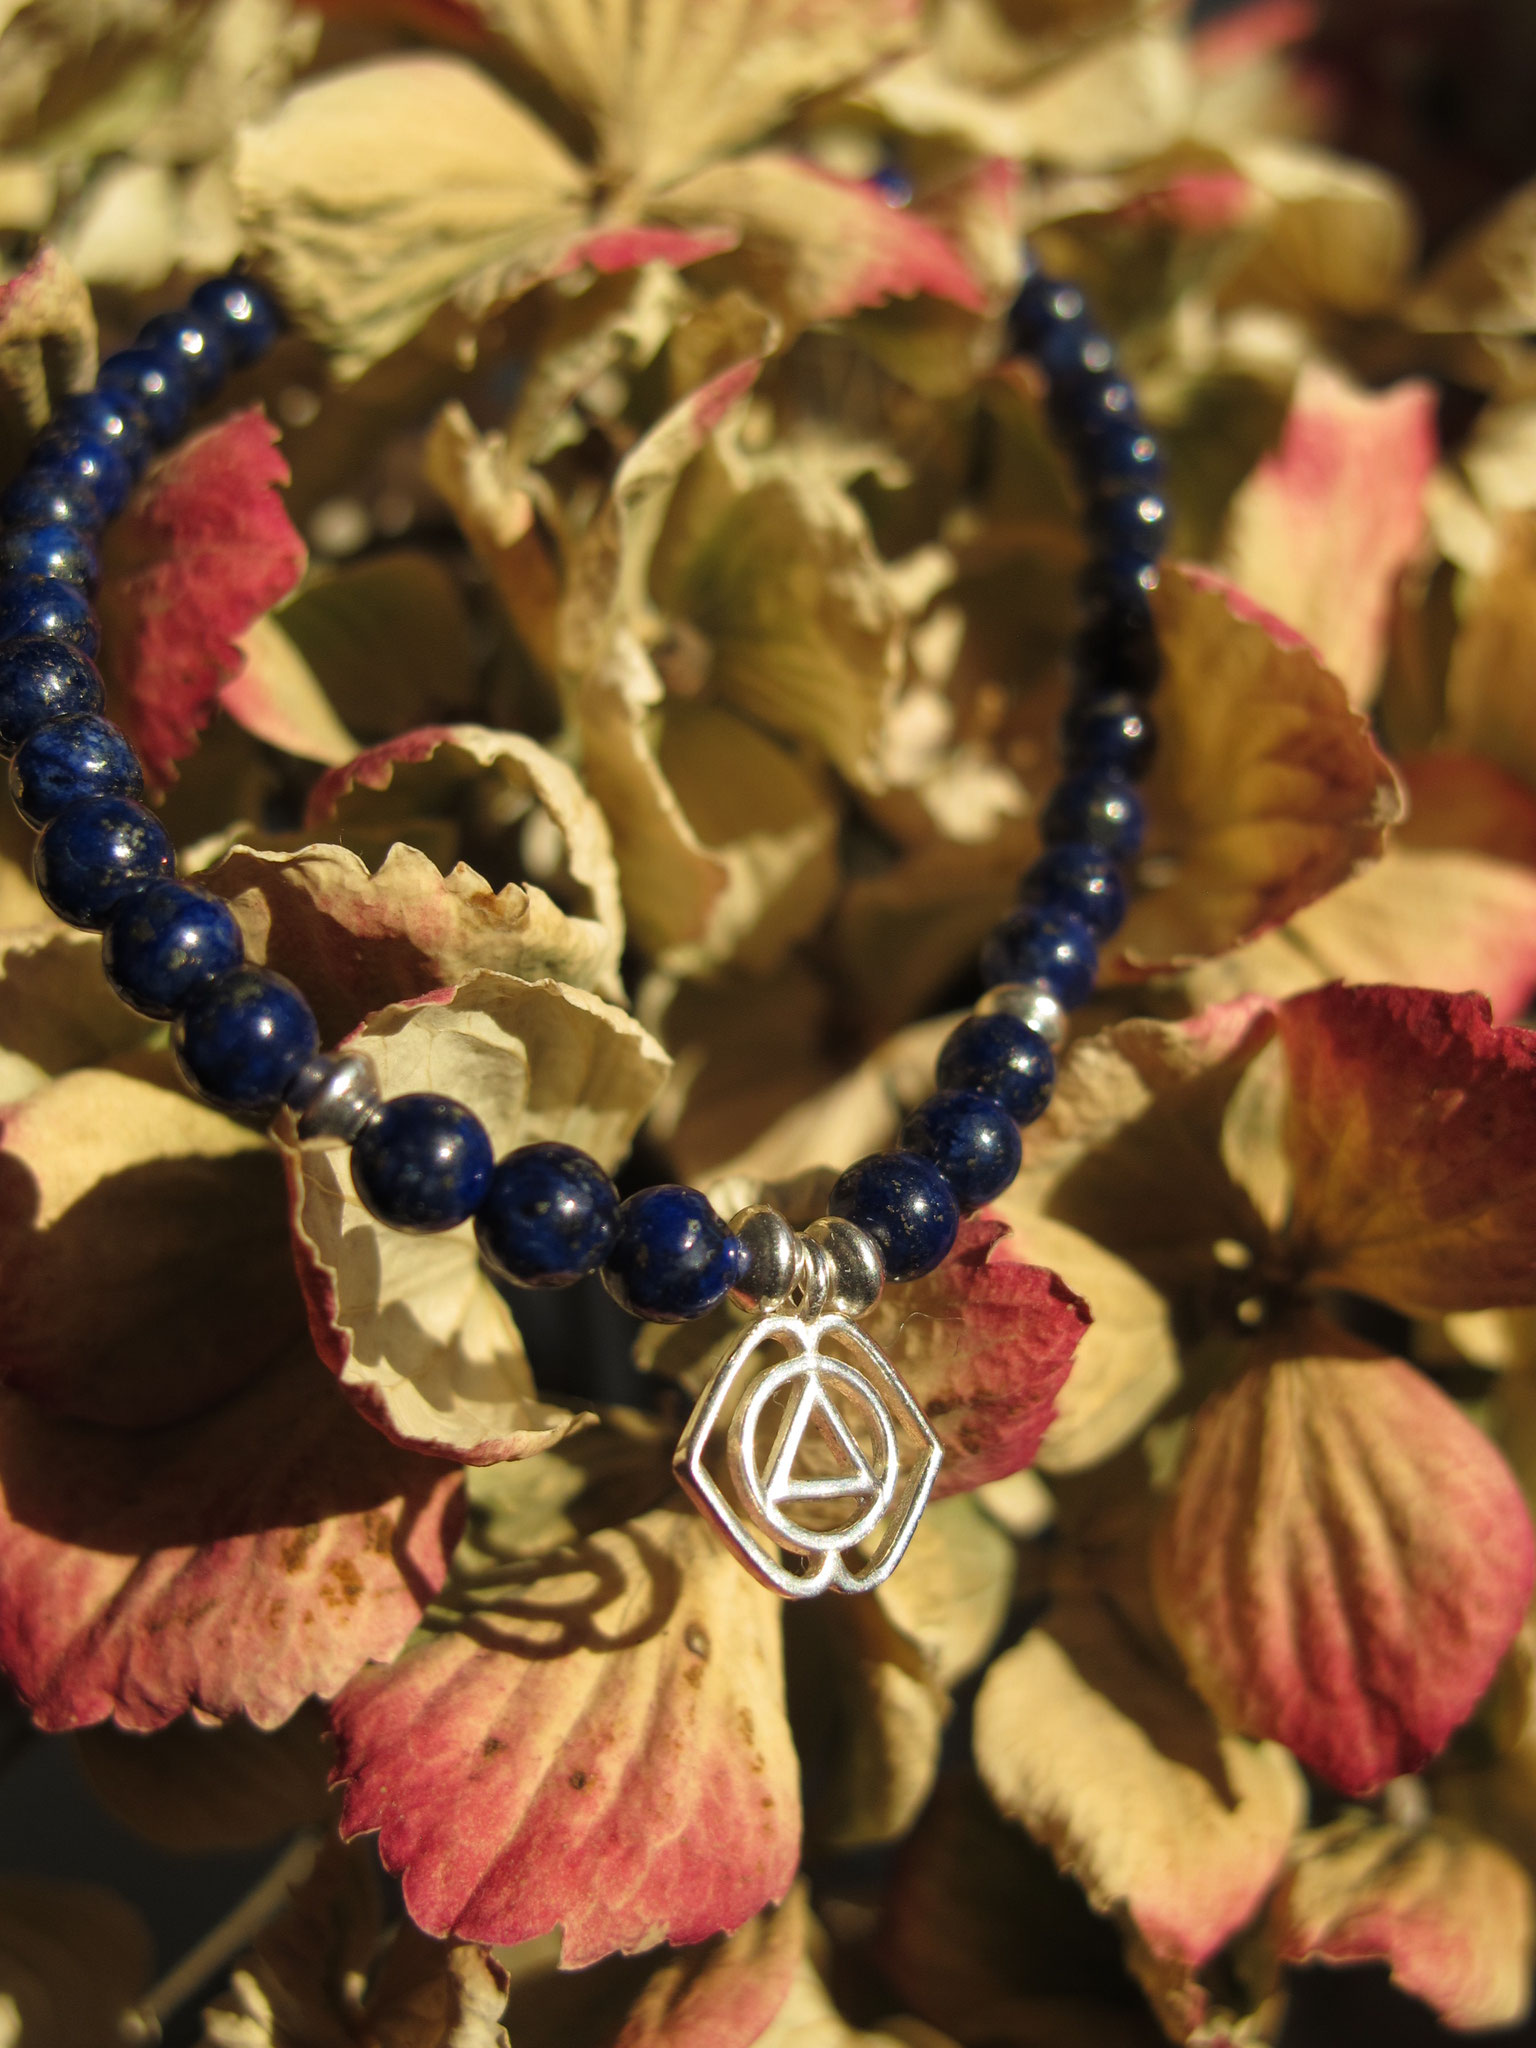 The Chakra collection: (6) Third eye chakra; the all seeing and deep blue lapis lazuli